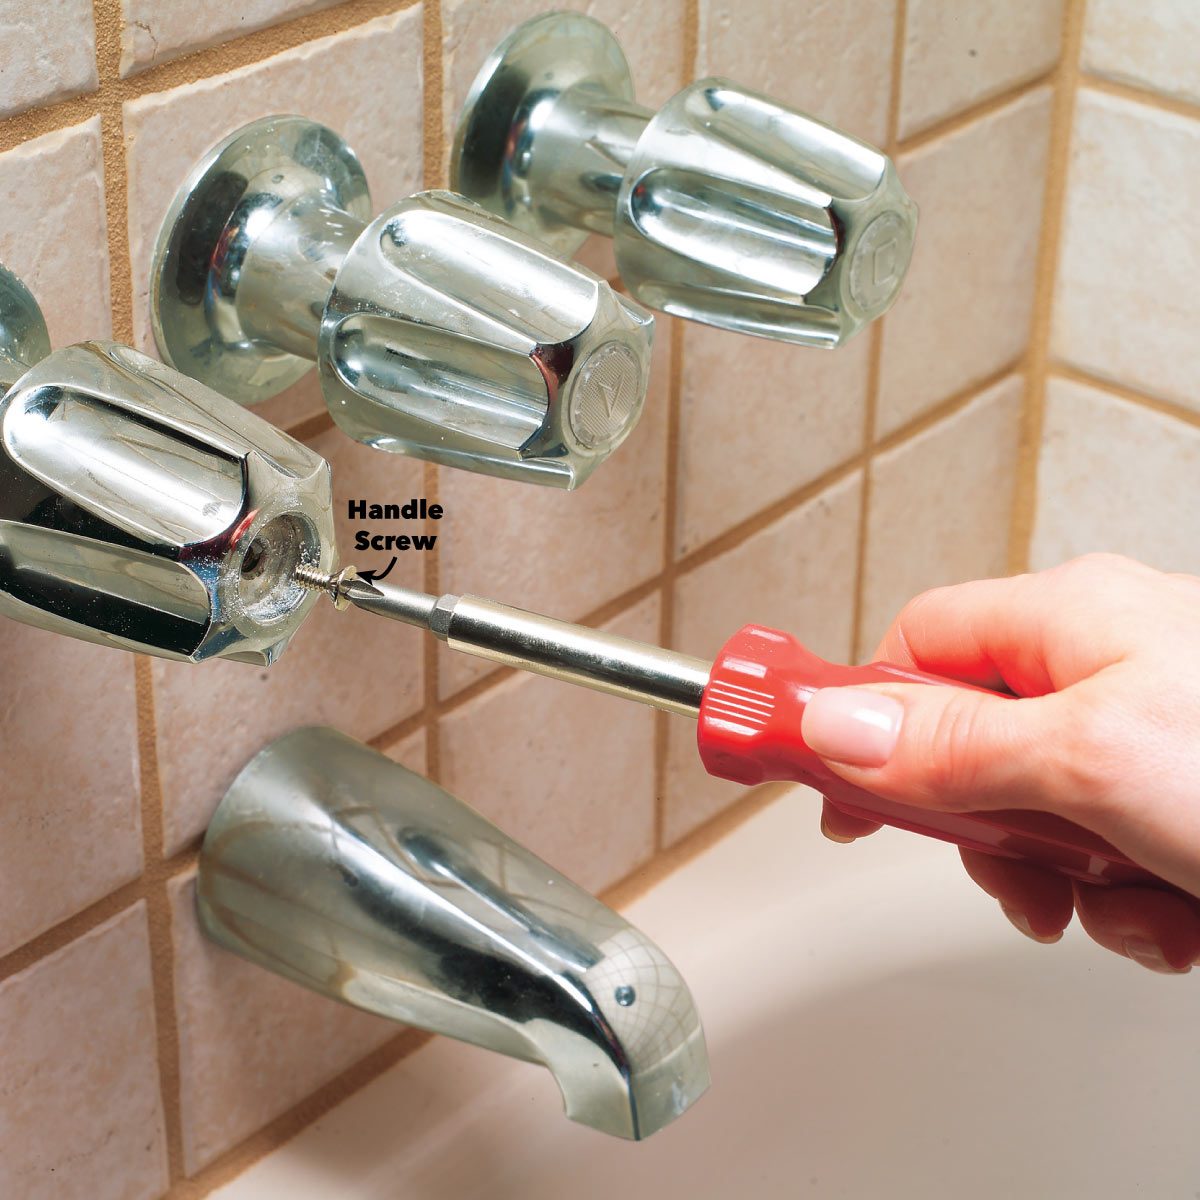 How To Fix A Leaking Bathtub Faucet Family Handyman